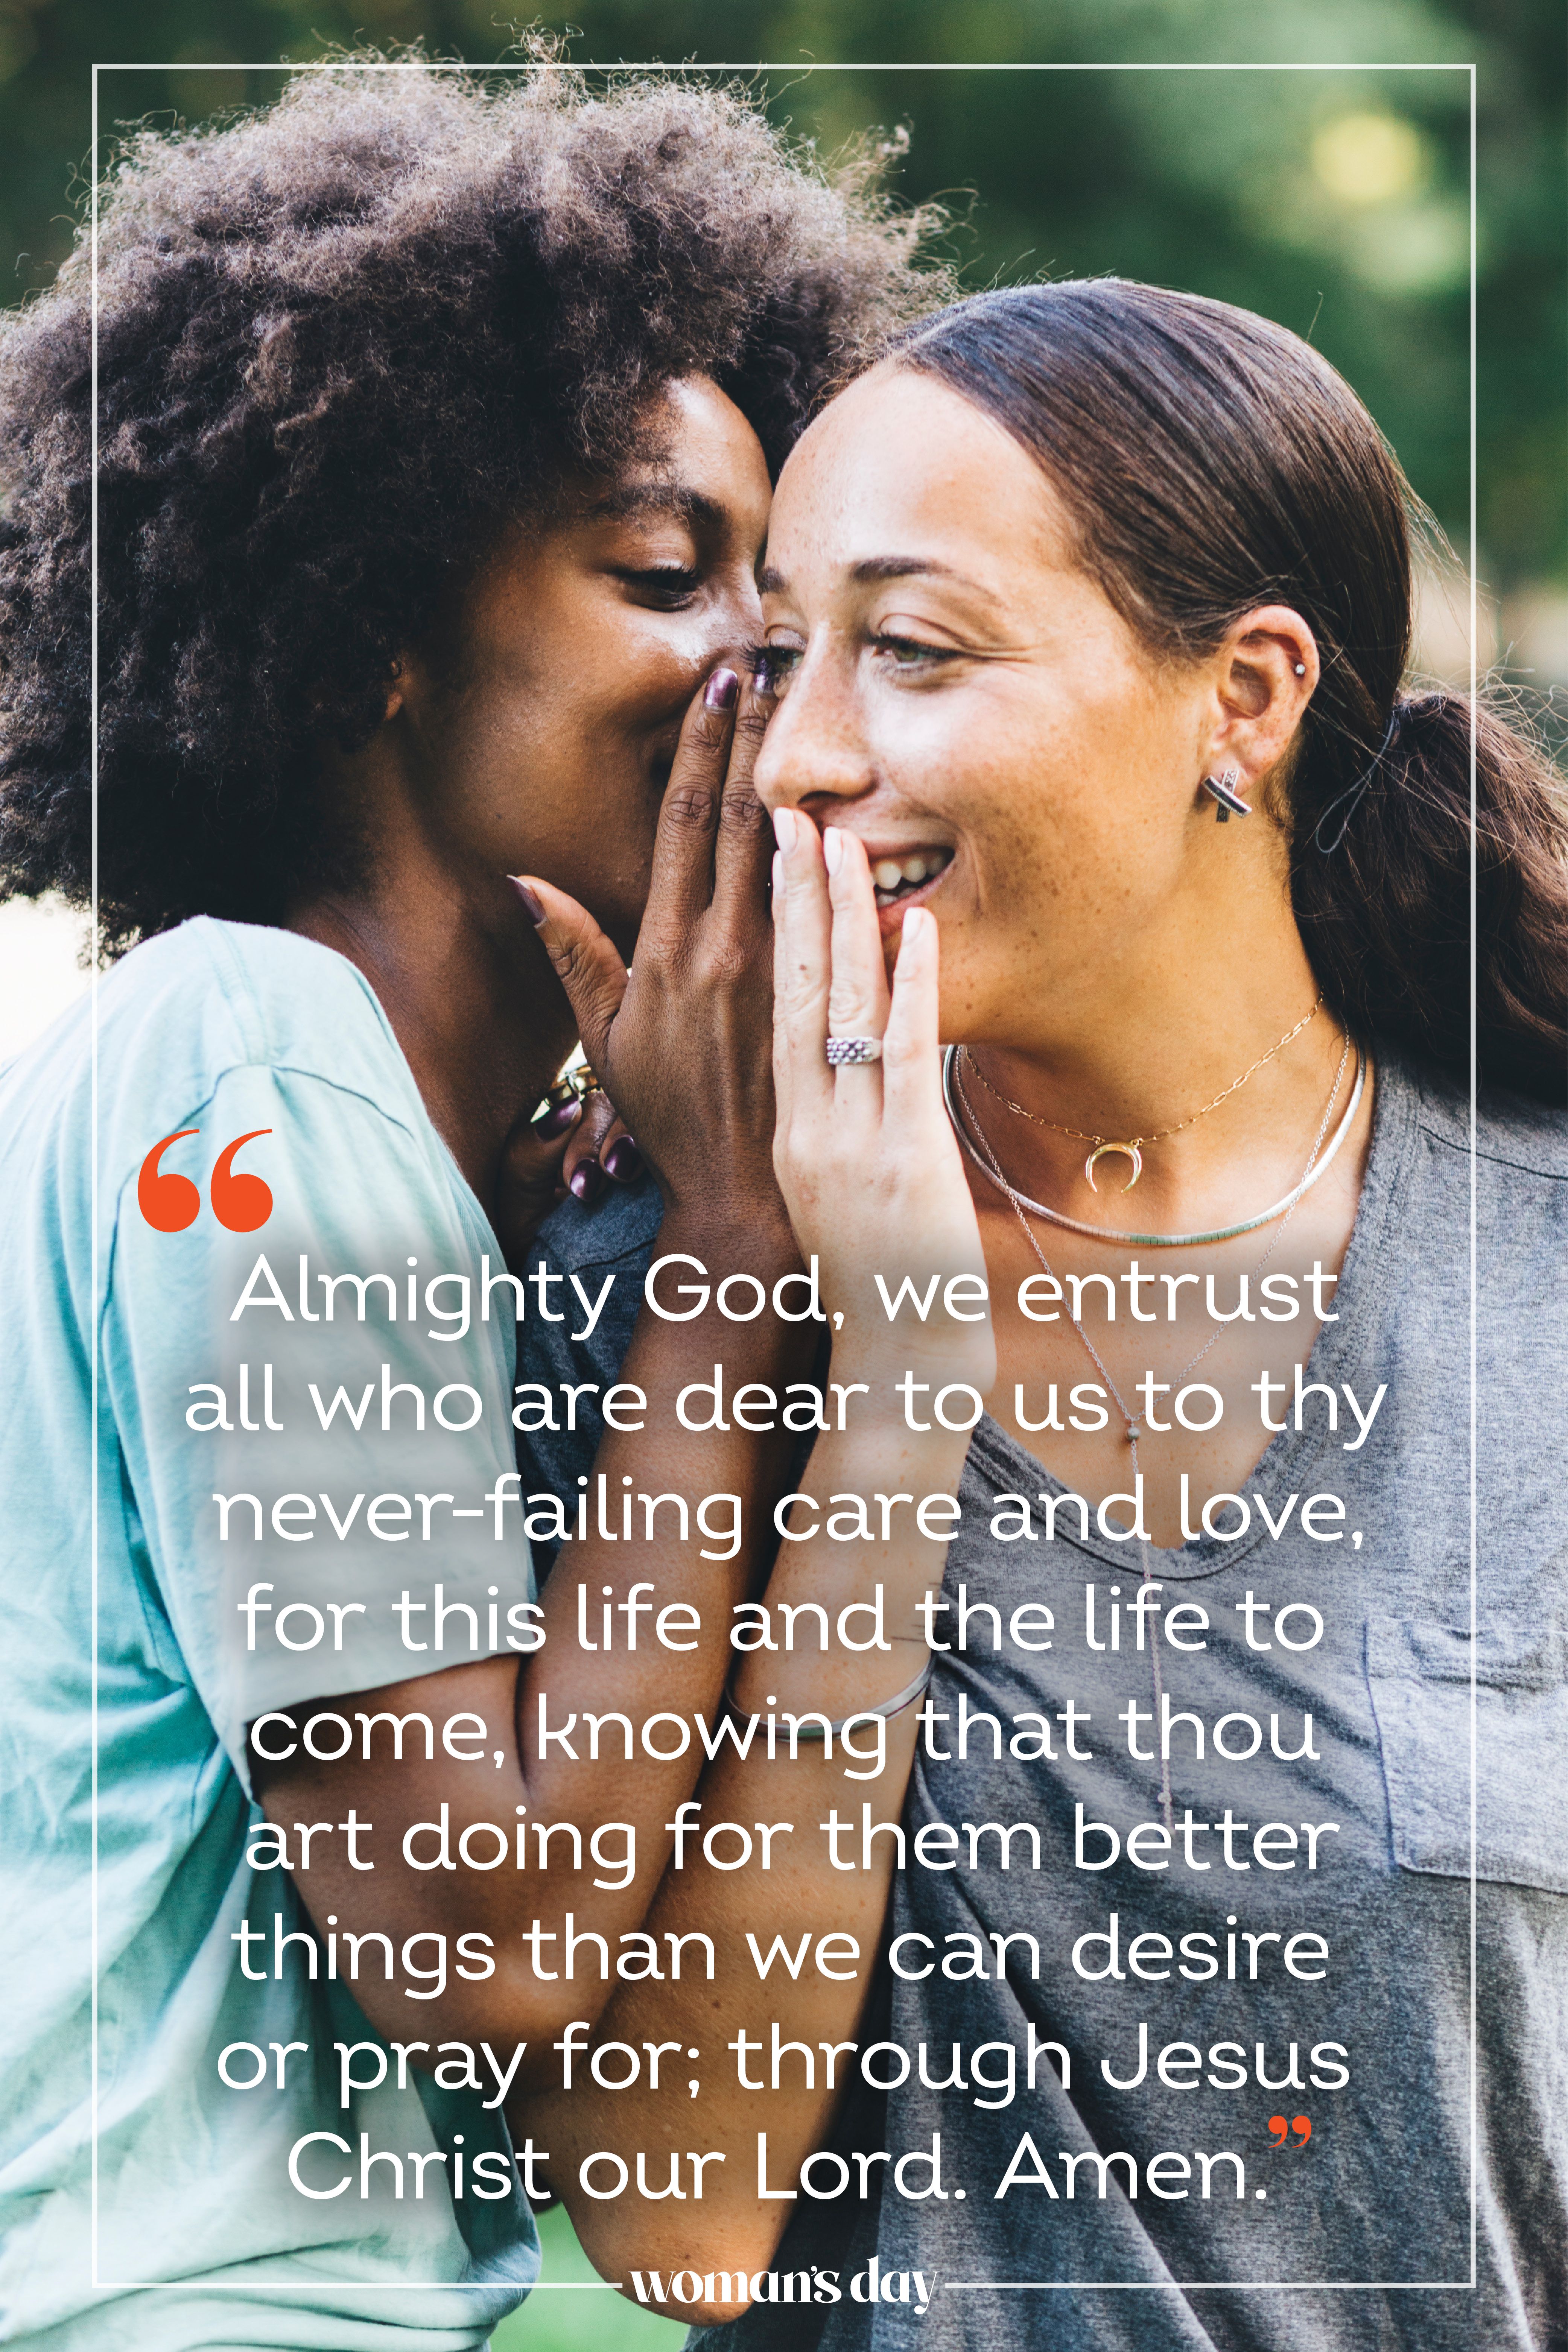 Almighty God, whose life is our true life, whose love is our love